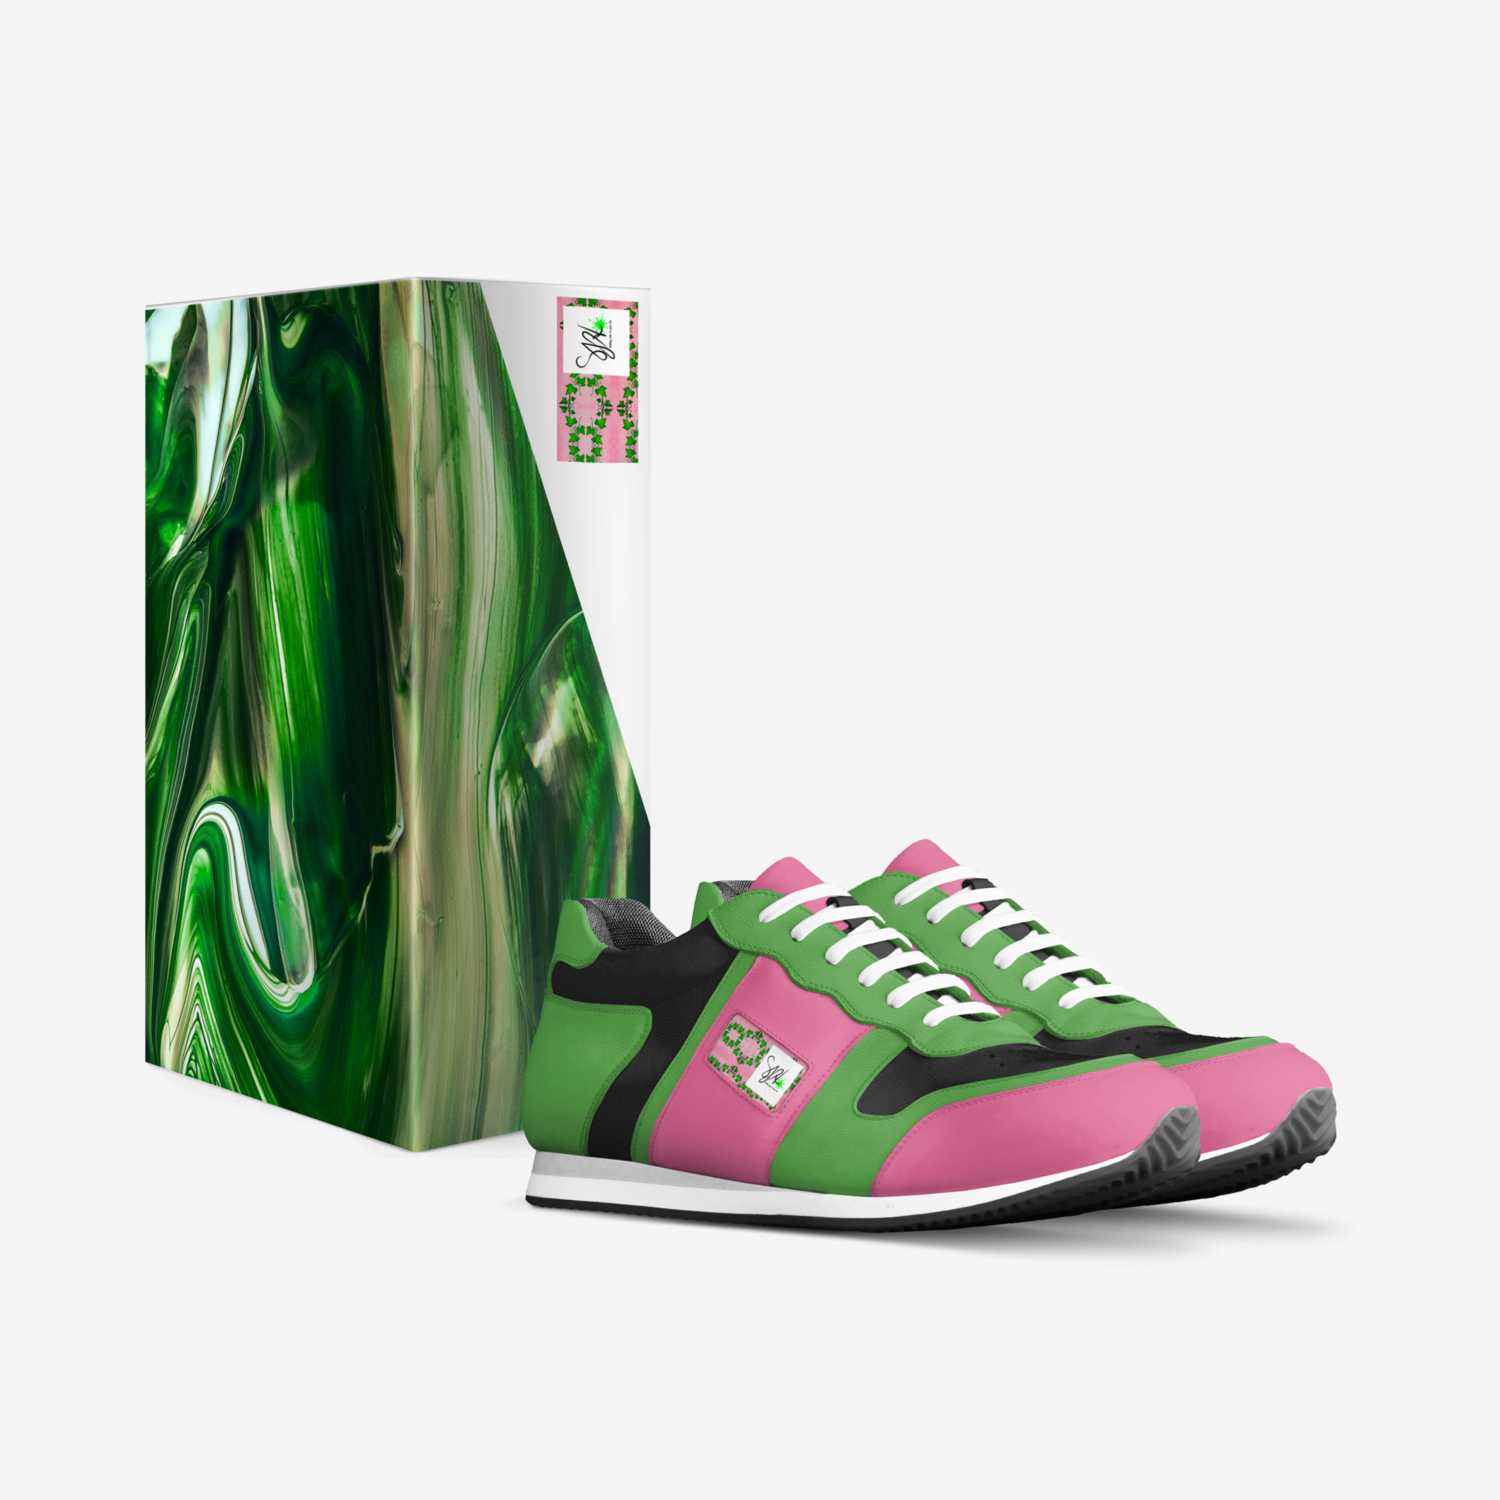 SJHall Active custom made in Italy shoes by Sheila Hall | Box view